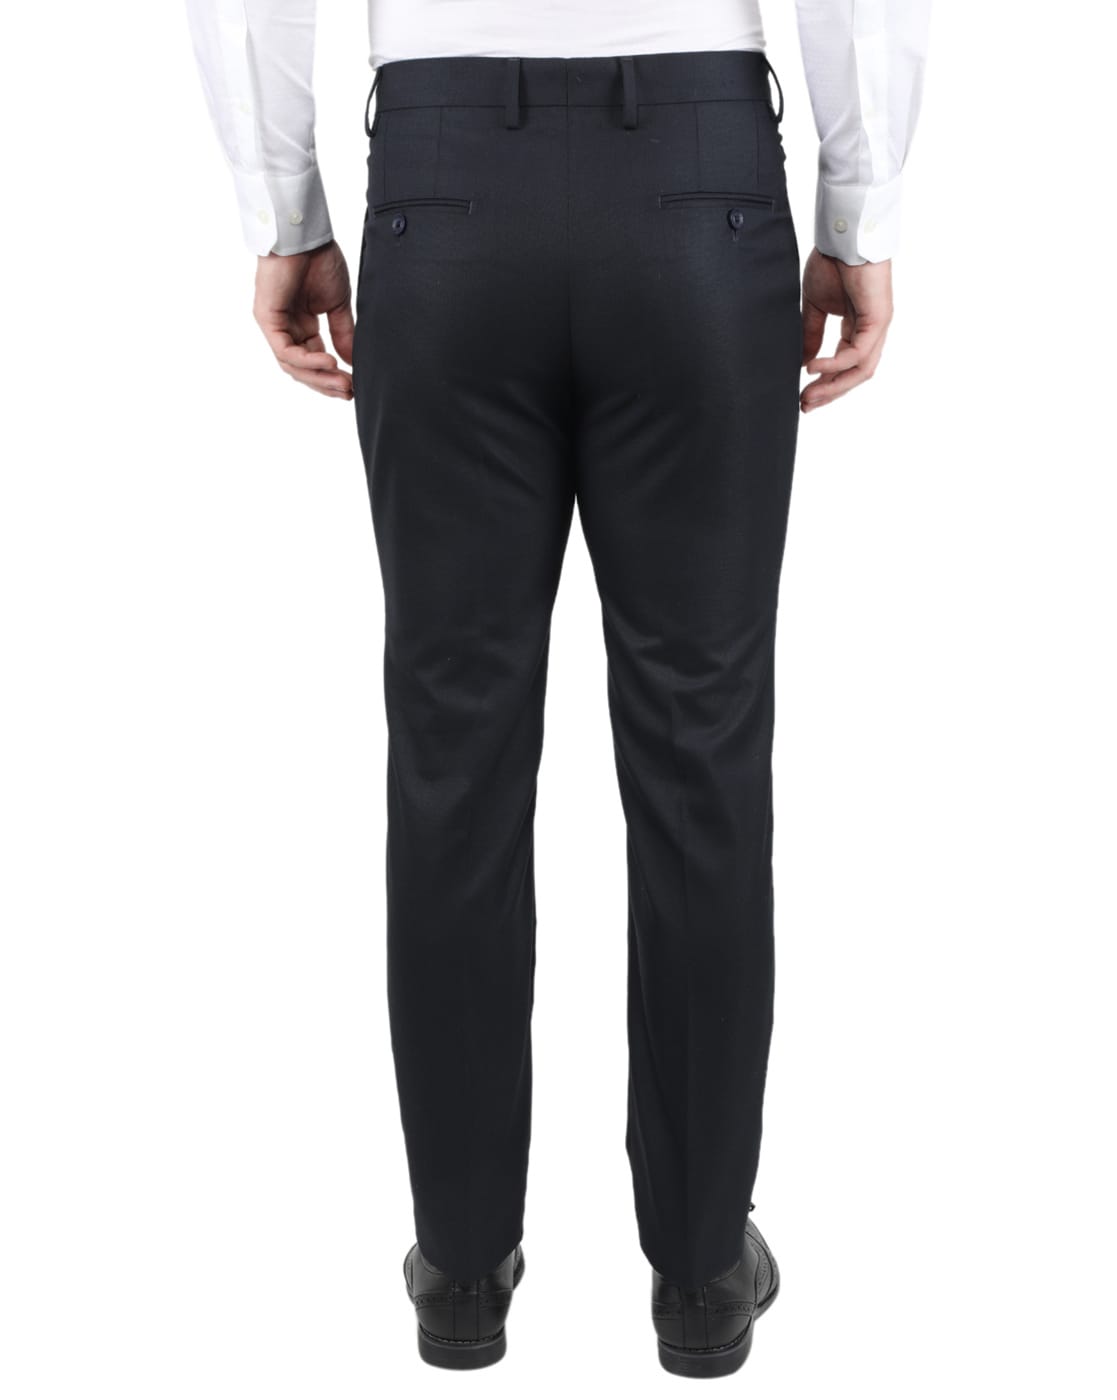 Formal Trousers in Surat at best price by Aardee Apparels - Justdial